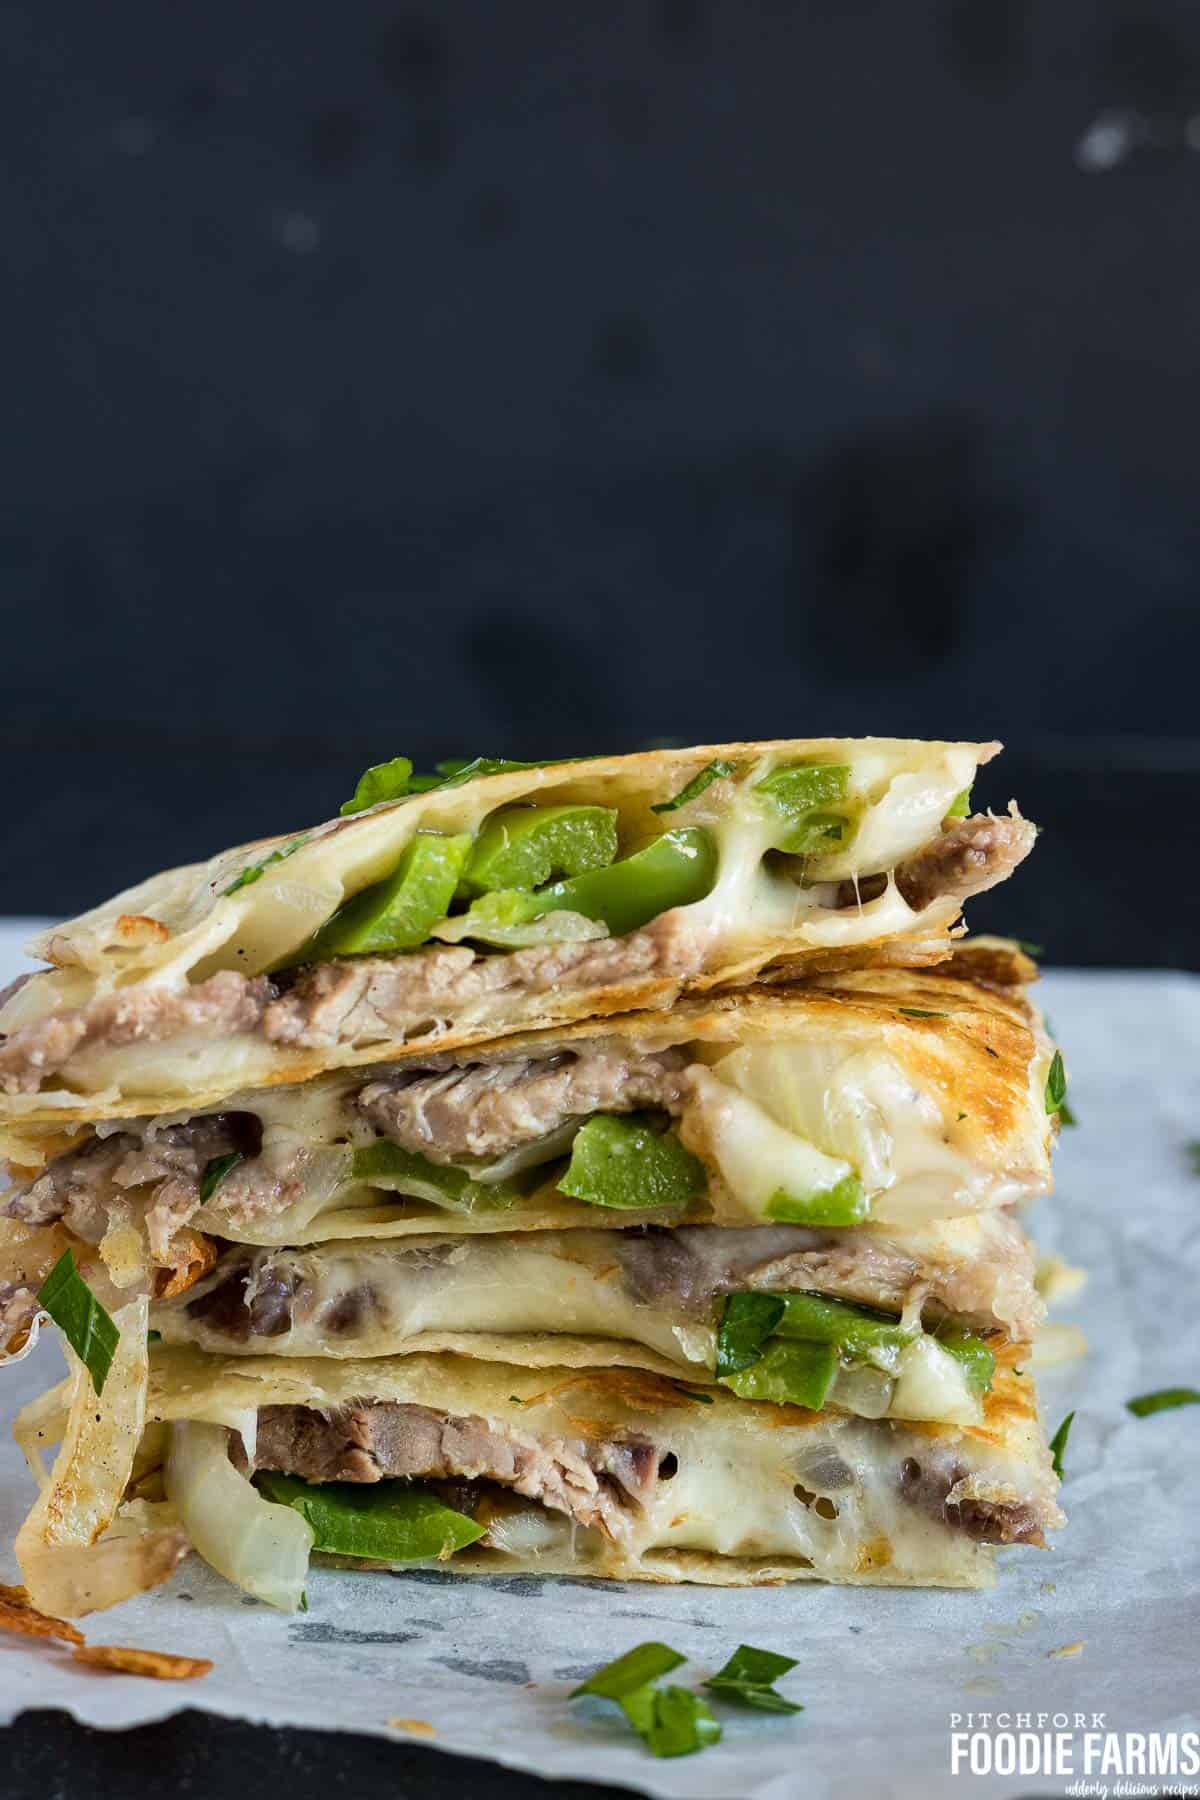 A stack of quesadilla wedges with steak and green peppers.